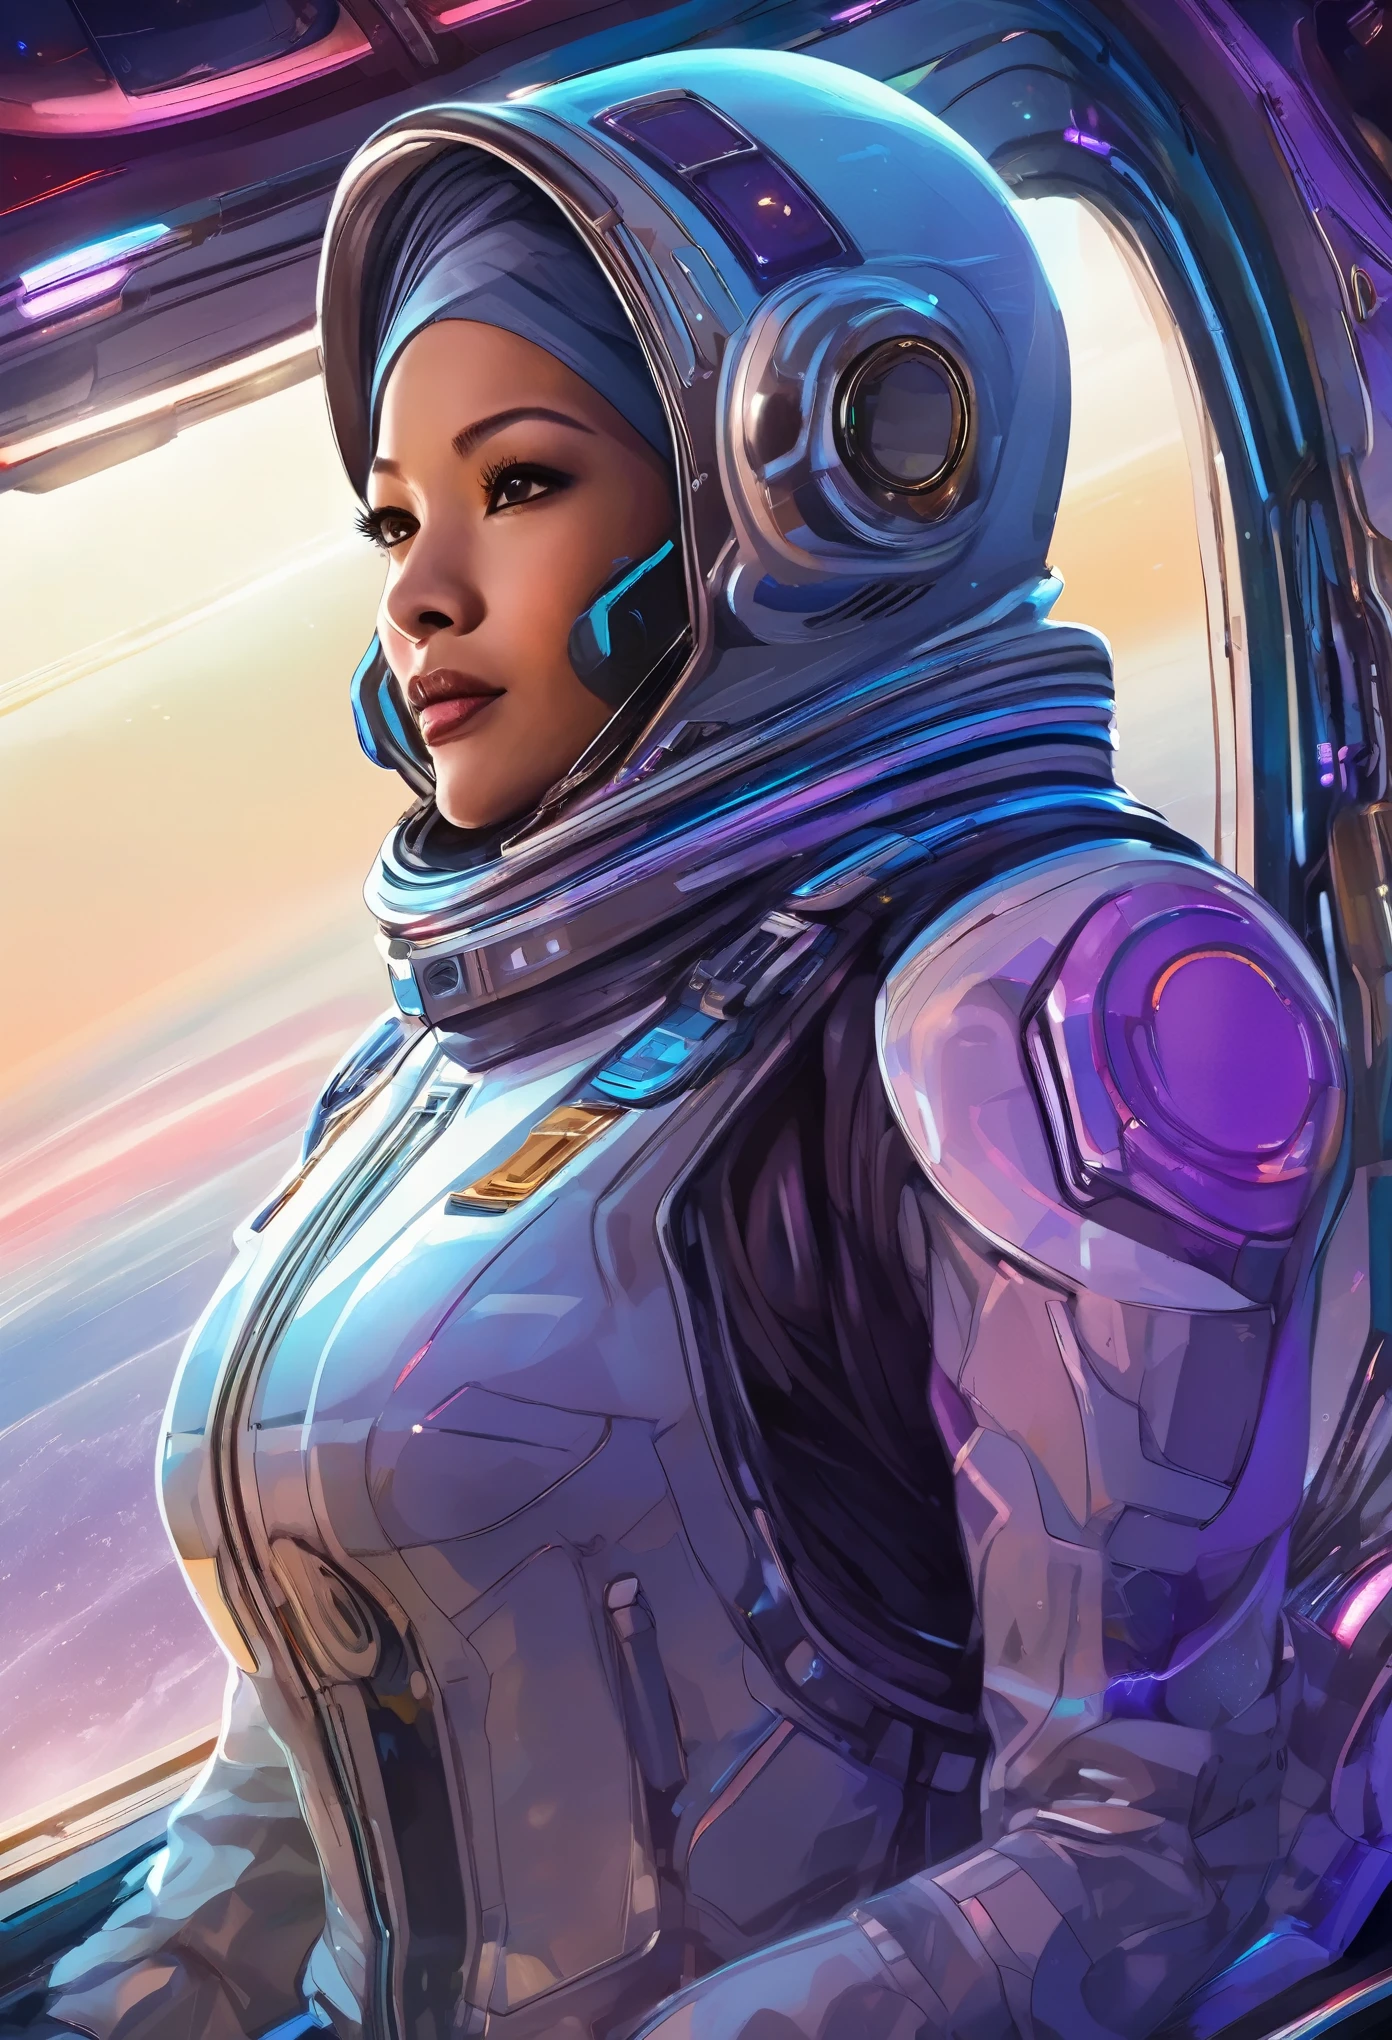 A busty woman, aged 40, from Malaysia, wearing a sexy space suit with a hijab covering her hair, is looking out of a window on her spaceship. The window overlooks a blurred motion of the outside, indicating a high-speed interstellar journey. The woman's confident gaze and the expression on her face suggest a sense of adventure and excitement. The window is surrounded by blinking lights and high-tech gadgets, showcasing the advanced technology and futuristic aesthetic of the spaceship. The lights create a mesmerizing display, illuminating the woman's face and highlighting her intriguing presence. The space suit she wears is sleek and form-fitting, emphasizing her curves and adding to the overall sensuality of the scene. The colors in the artwork are vibrant and dynamic, representing the vastness and beauty of the cosmos. Soft, ethereal blues and purples dominate the color palette, with occasional pops of bright and vivid colors. The lighting inside the spaceship is dim and atmospheric, casting dramatic shadows and enhancing the overall ambiance of the scene. The space ship itself is a marvel of engineering and design, with clean lines and futuristic shapes, seamlessly blending function and aesthetics. Overall, the prompt captures a compelling mix of sensuality and high-tech futurism, creating a visually stunning and captivating scene.